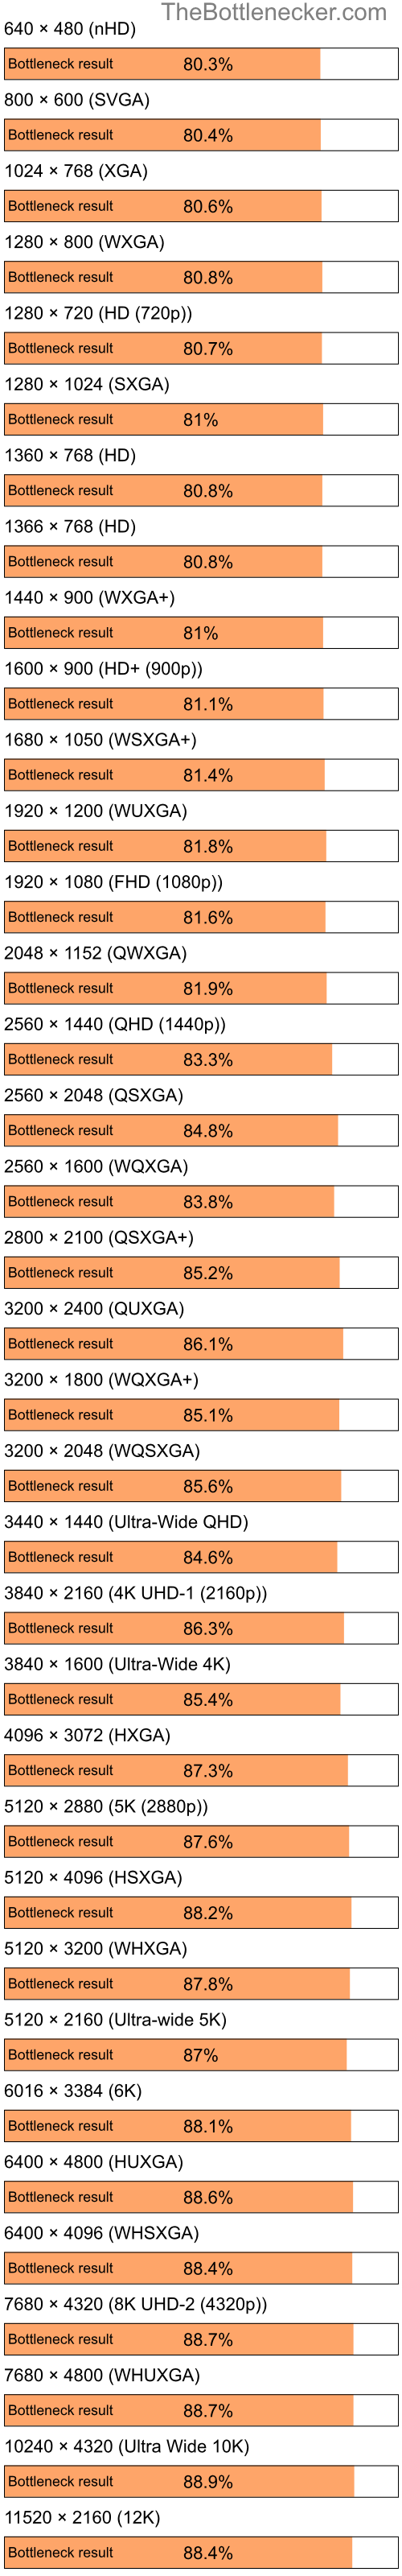 Bottleneck results by resolution for Intel Celeron M and AMD Radeon X1250 in Graphic Card Intense Tasks